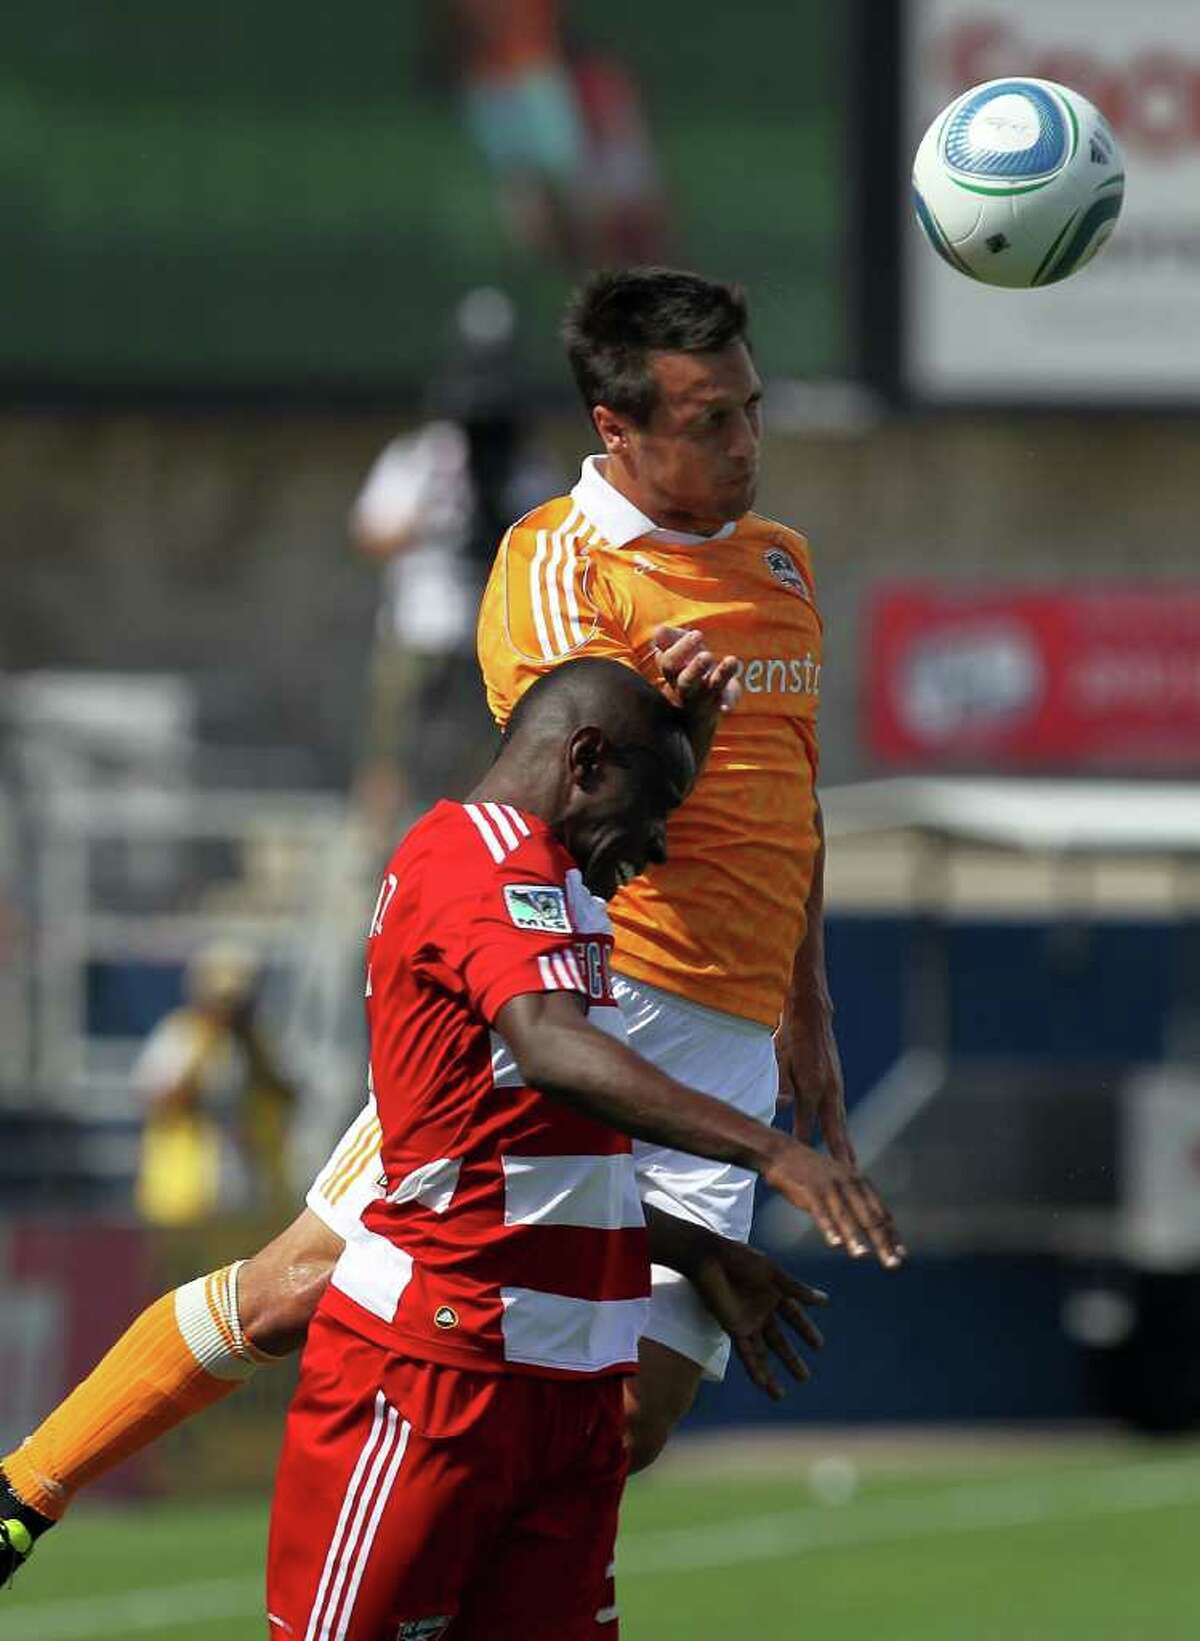 Dynamo 1, FC Dallas 0: Jair Benitez #5 of FC Dallas jumps for the header with Danny Cruz #5 of the Houston Dynamo at Pizza Hut Park on September 24, 2011 in Frisco, Texas.